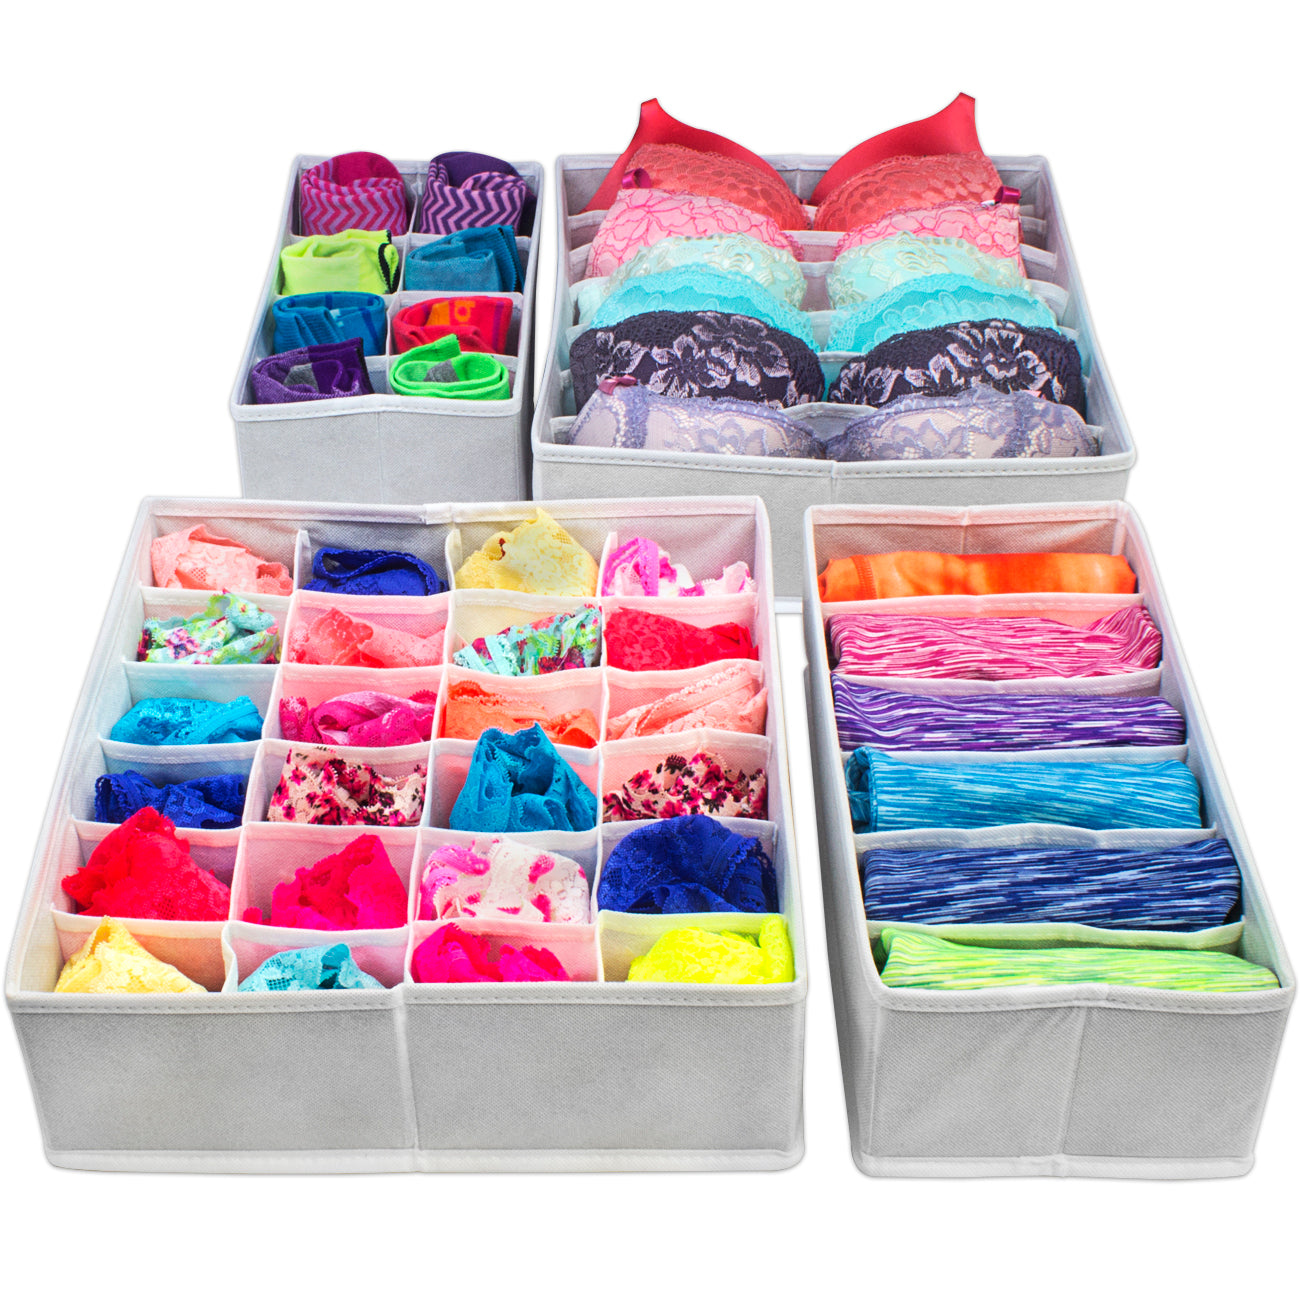 Foldable Underwear Storage Box - Organize Your Clothing And